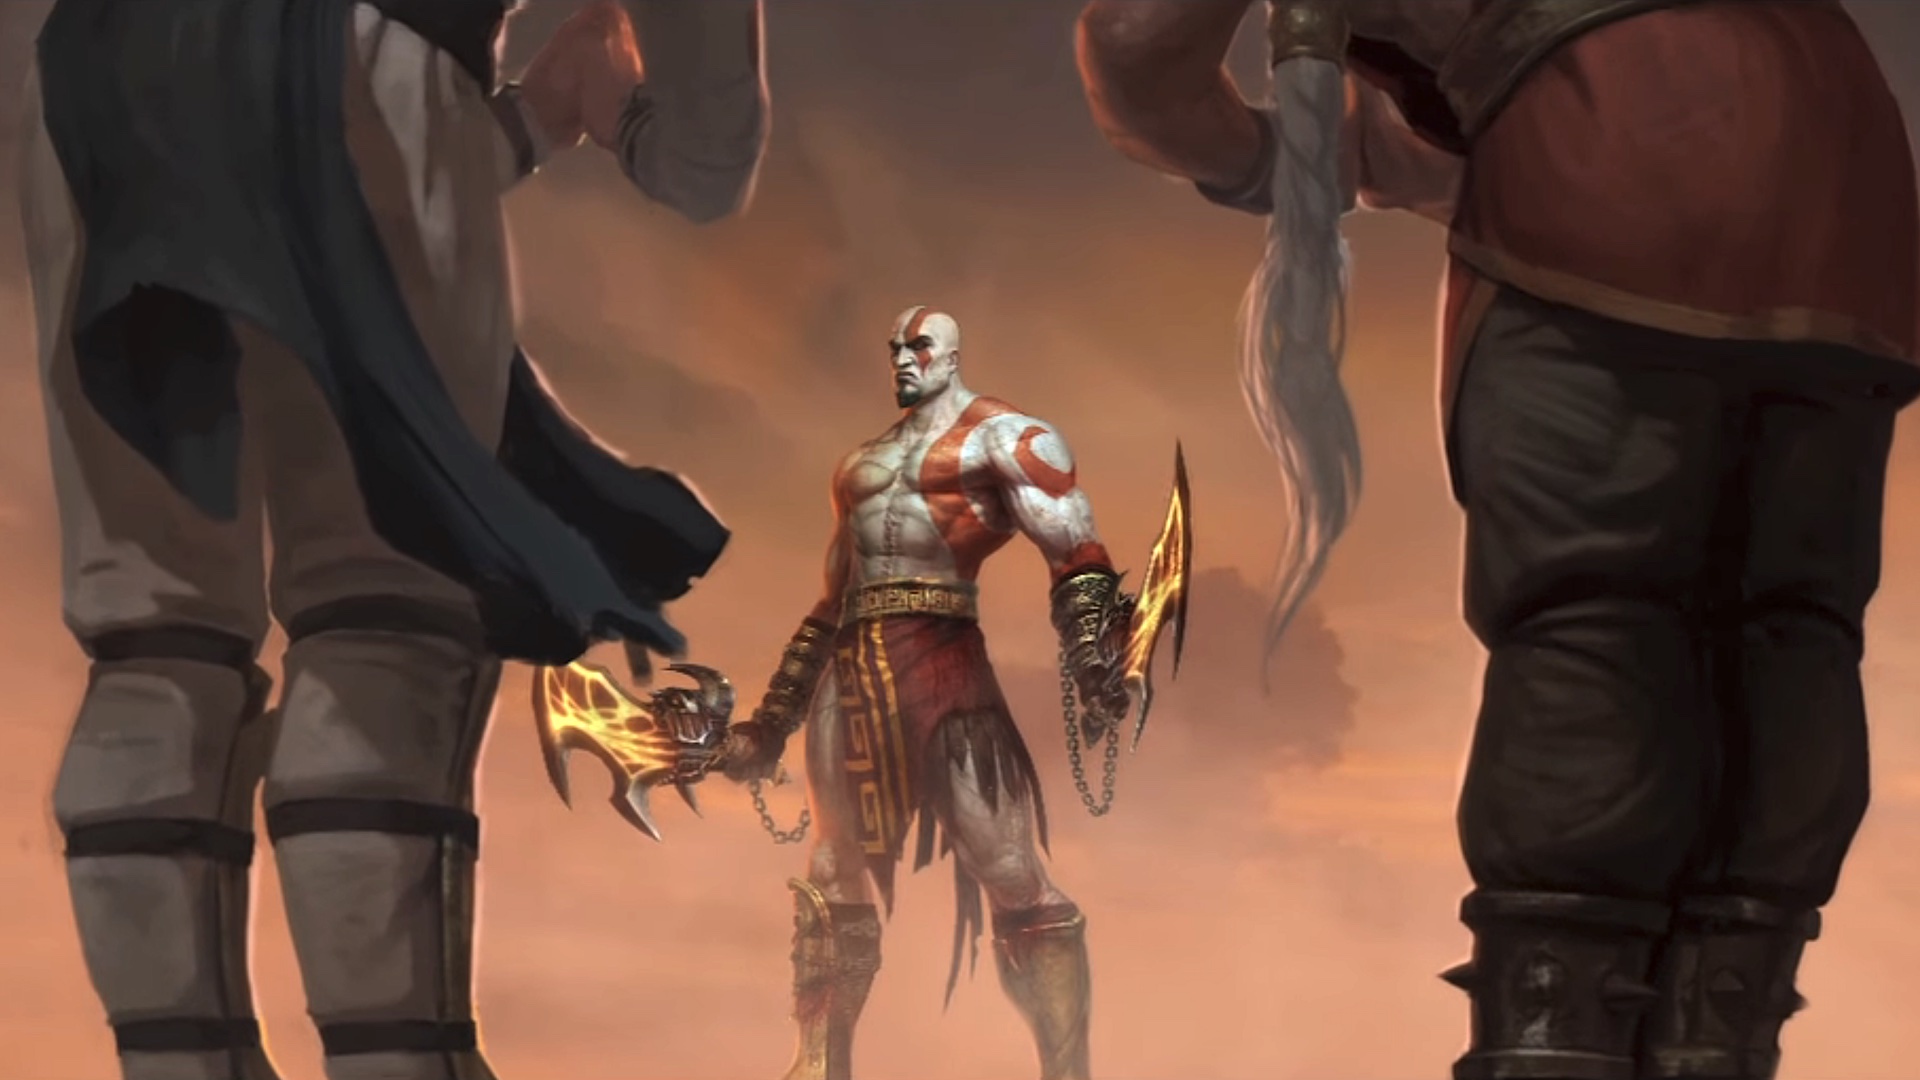 Kratos, armed with his Blades of Chaos, faces a bowing Raiden and Fujin in his ending from Mortal Kombat 9